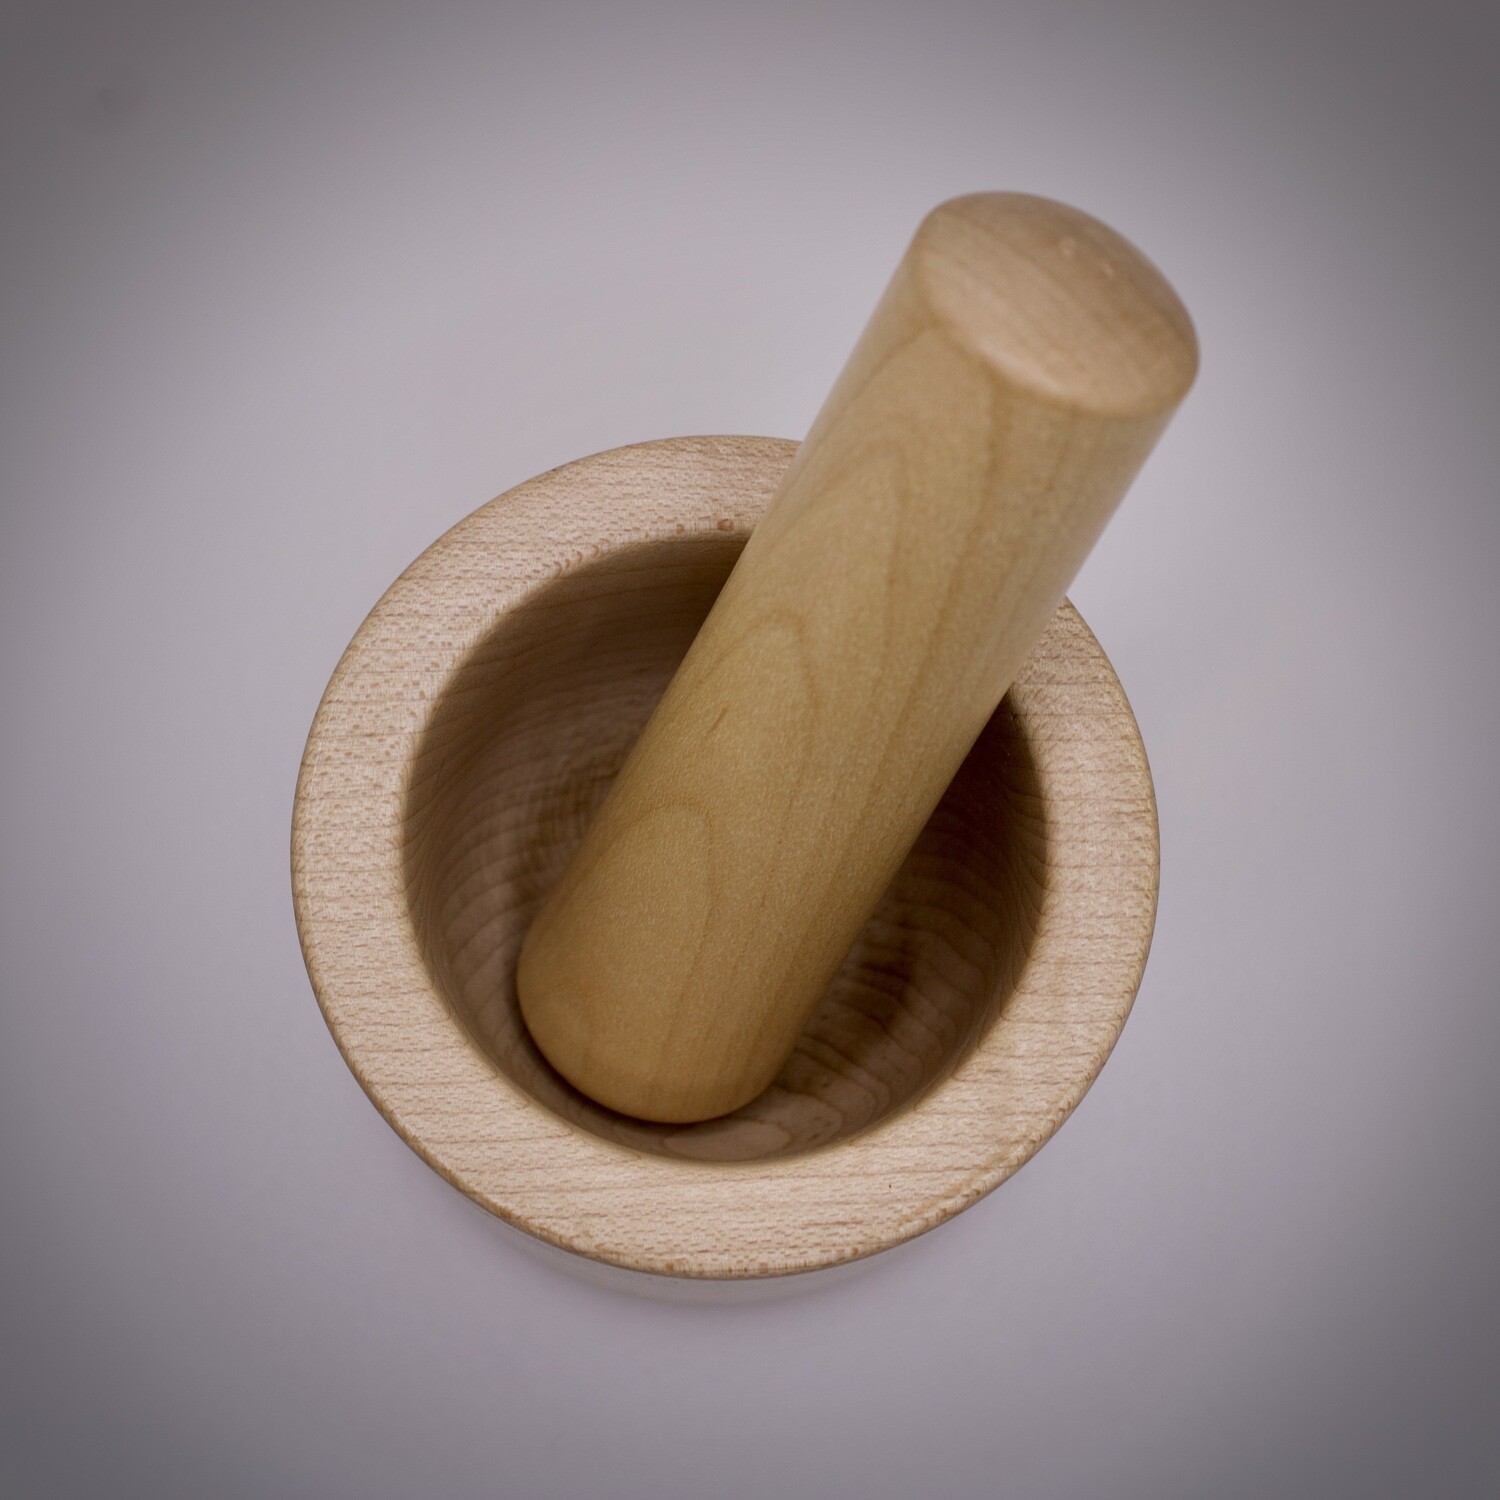 Maple Mortar and Pestle